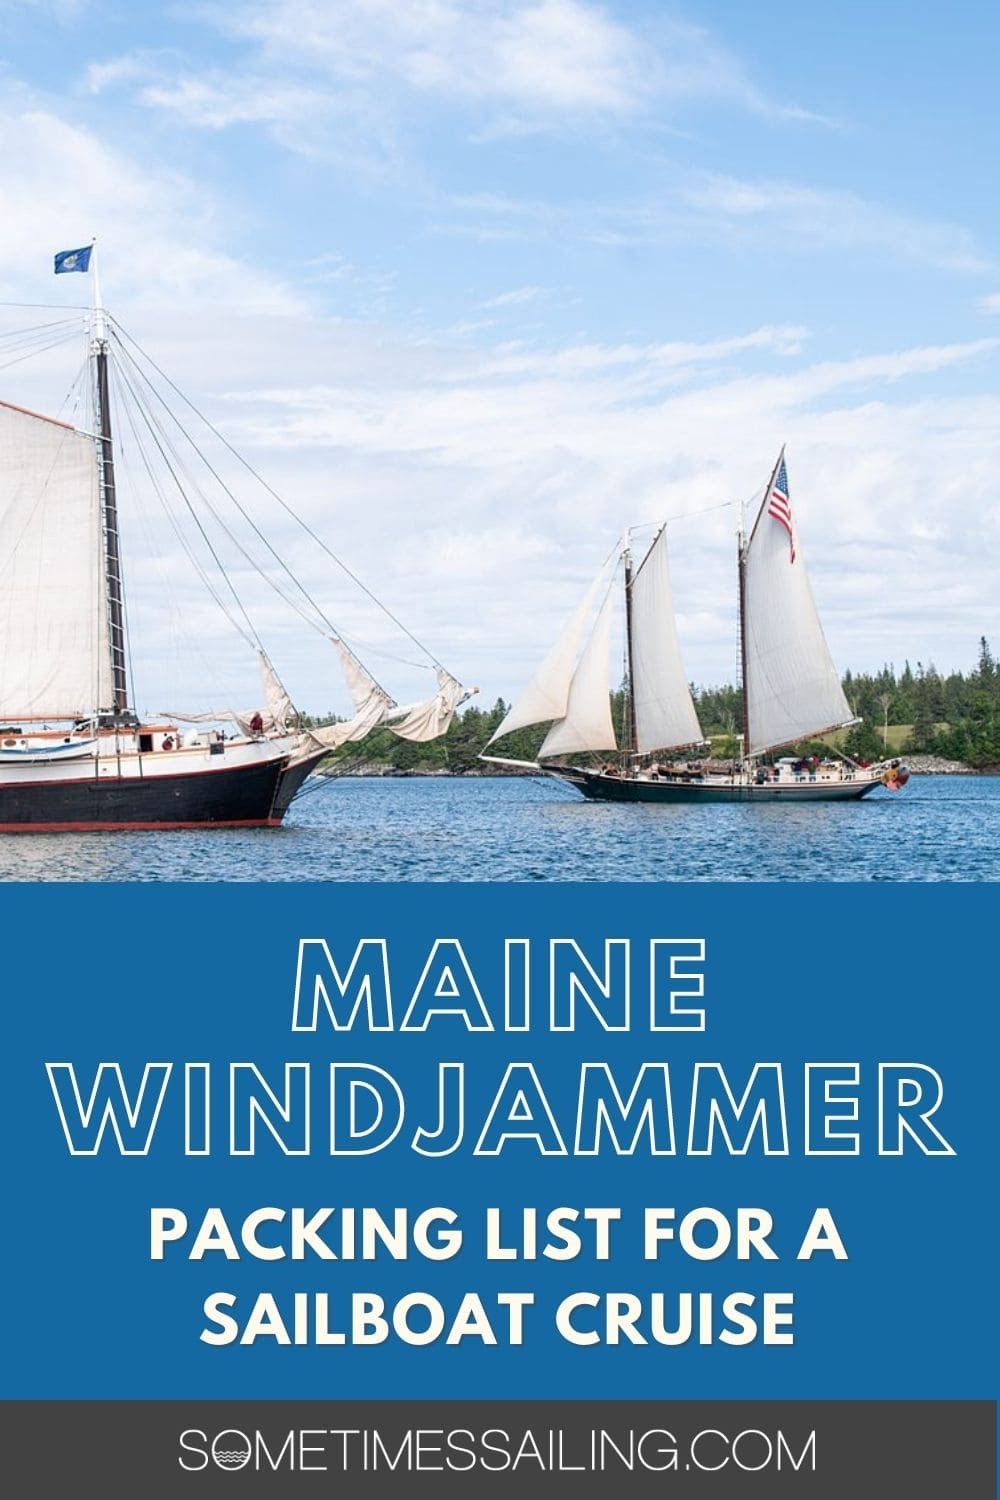 Maine Windjammer Packing List for a sailboat cruise, with a picture of two sailboats in the distance on the left and right.